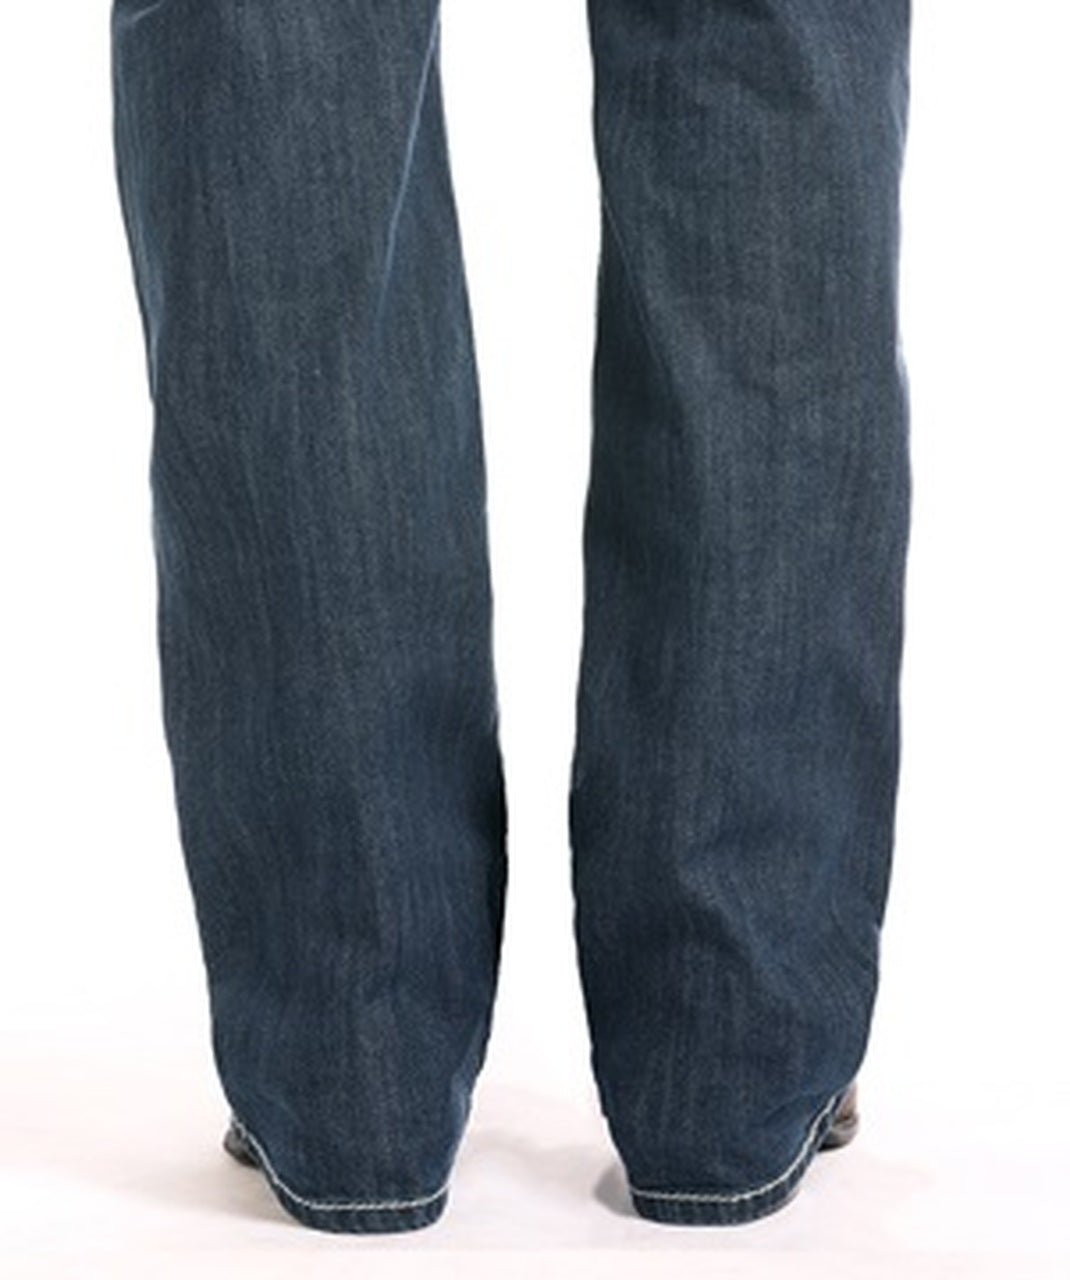 & Roll Denim Men's Relaxed Fit Stretch Straight Bootcut Jeans - Medium Wash Breeches.com